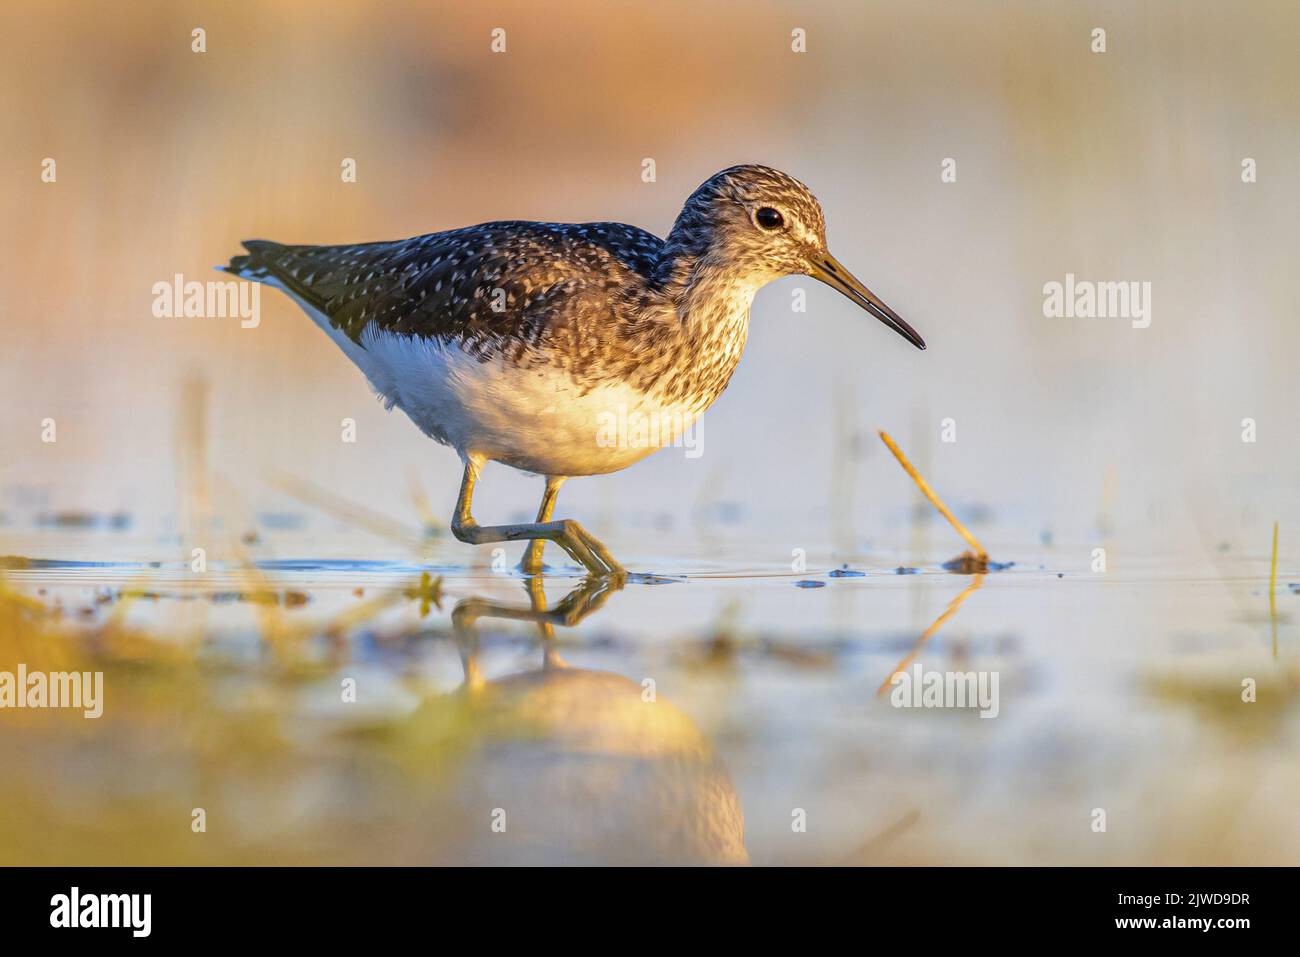 Green Sandpiper (Tringa ochropus) is a small Wader Shorebird of the Old World. Bird Wading in Shallow Water of Wetland during Migration. Wildlife Scen Stock Photo